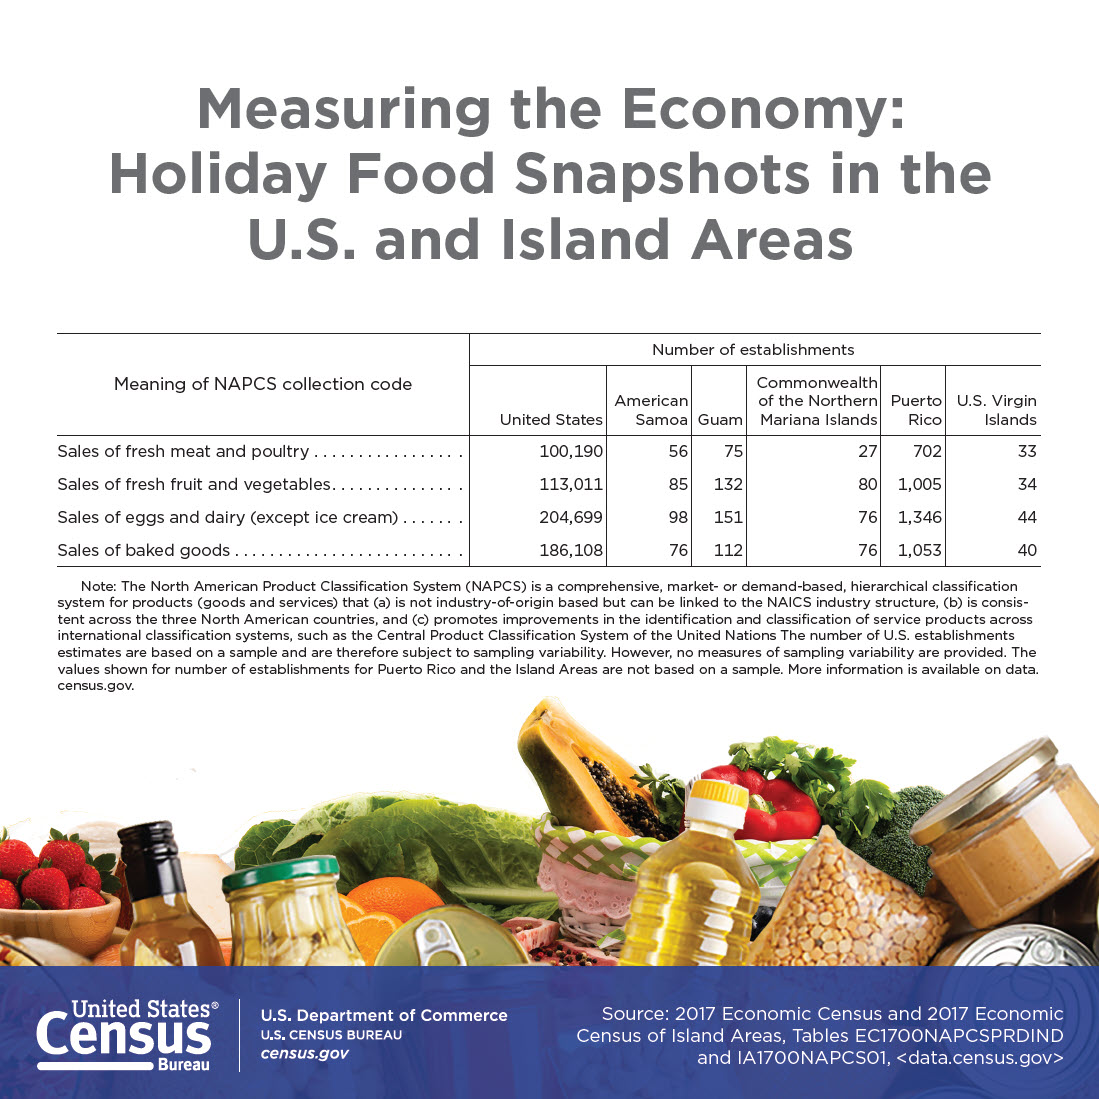 Measuring the Economy: Holiday Food Snapshots in the U.S. and Island Areas